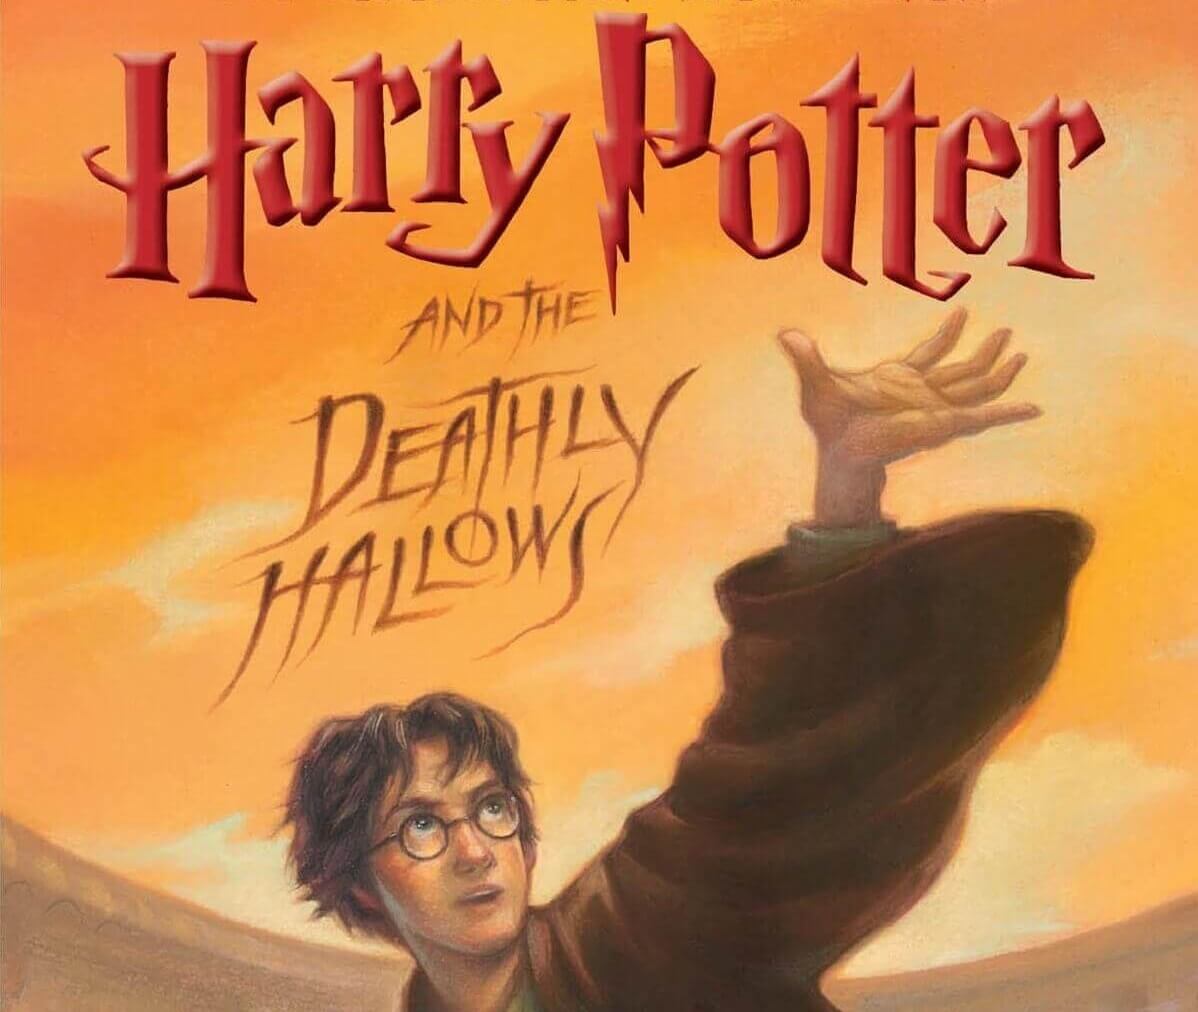 How Many Pages Is Harry Potter And The Deathly Hallows?